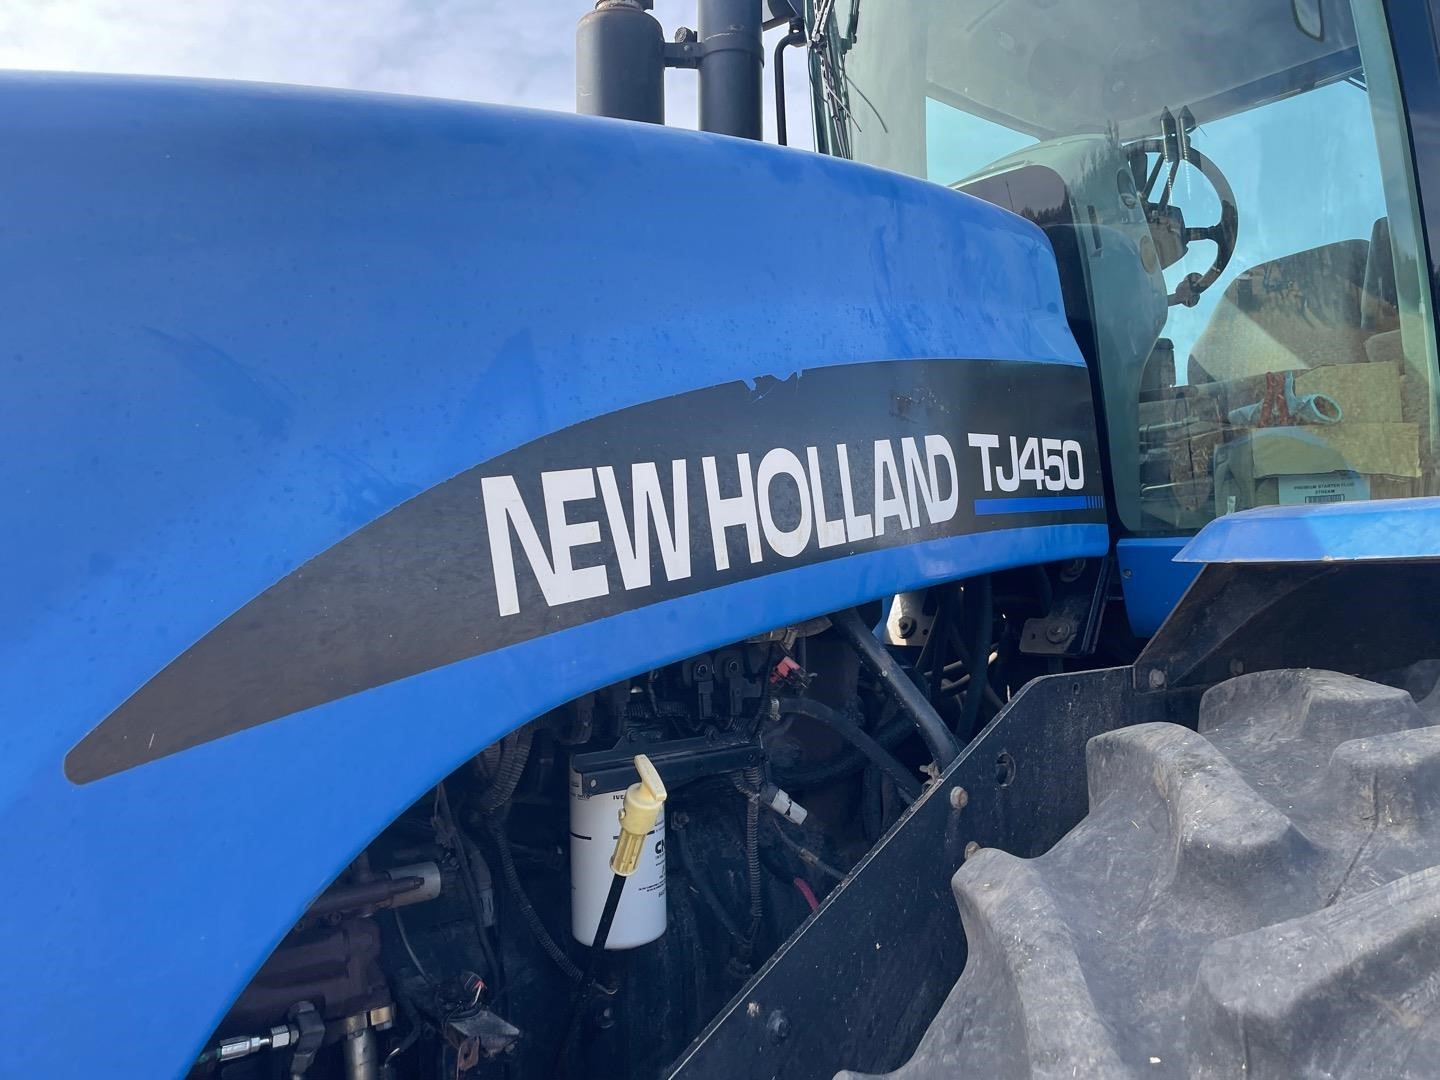 2001 New Holland TJ450 4WD Tractor BigIron Auctions